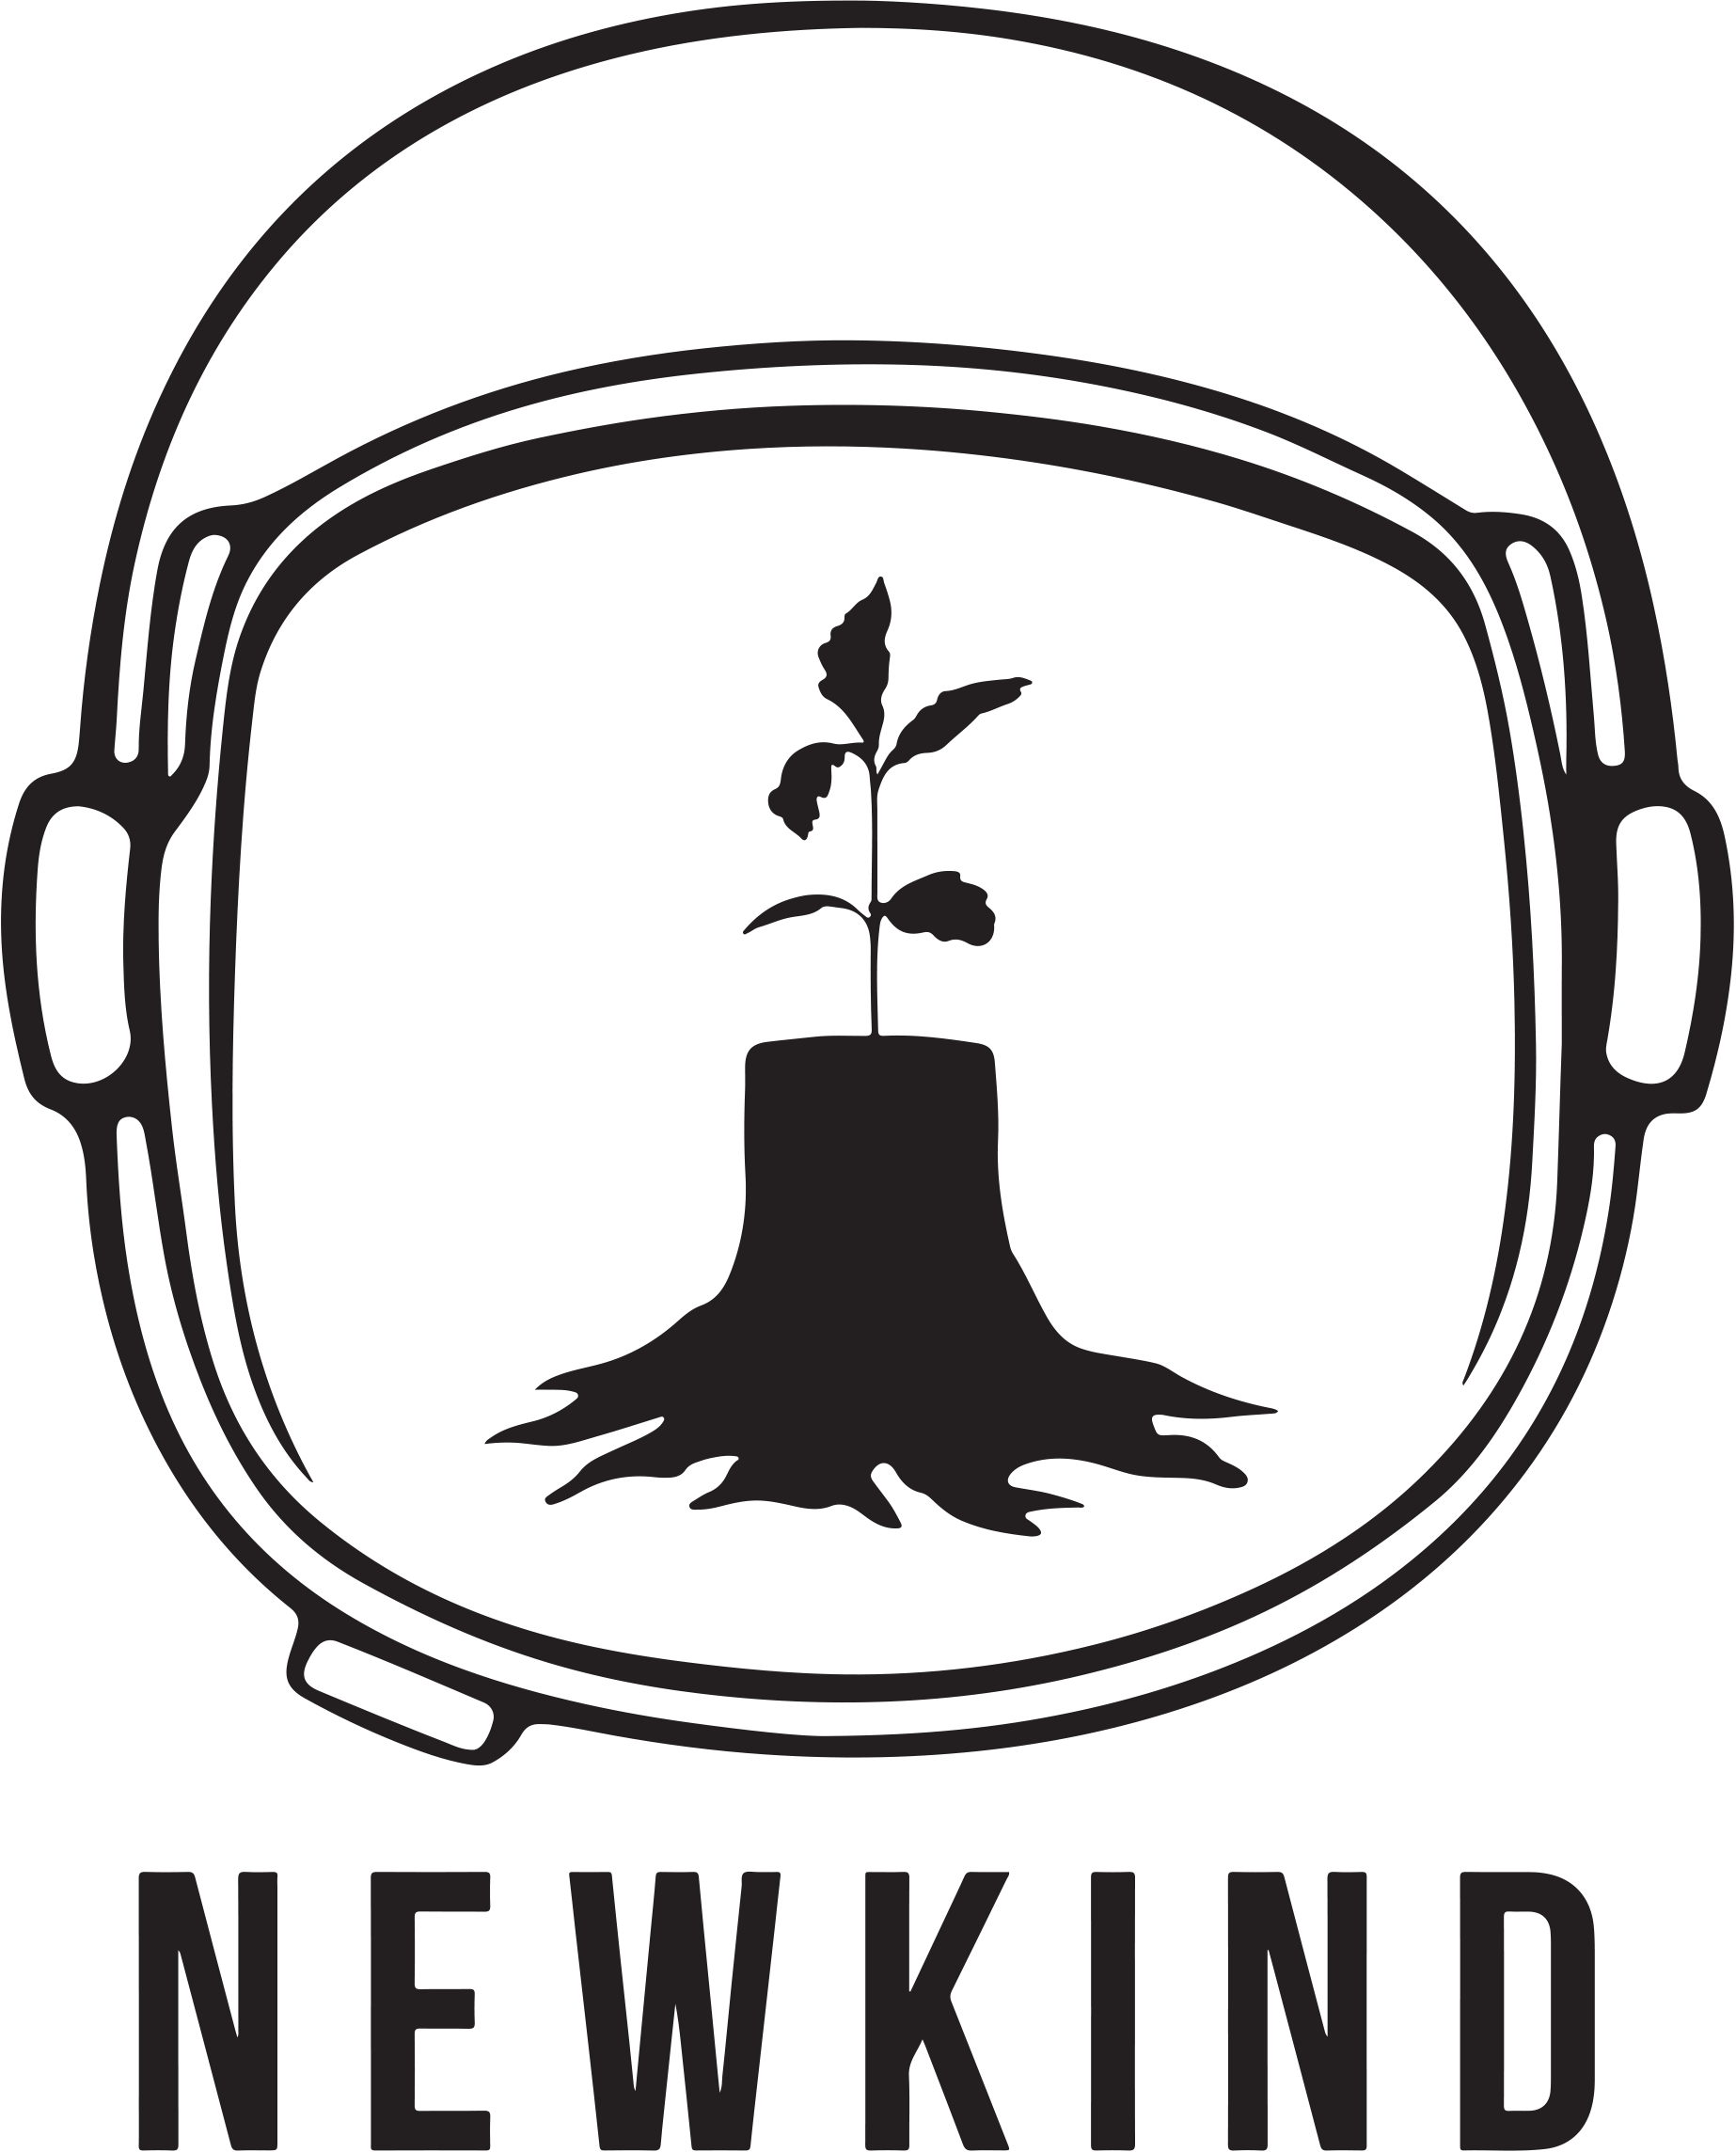 NEWKIND CONFERENCE